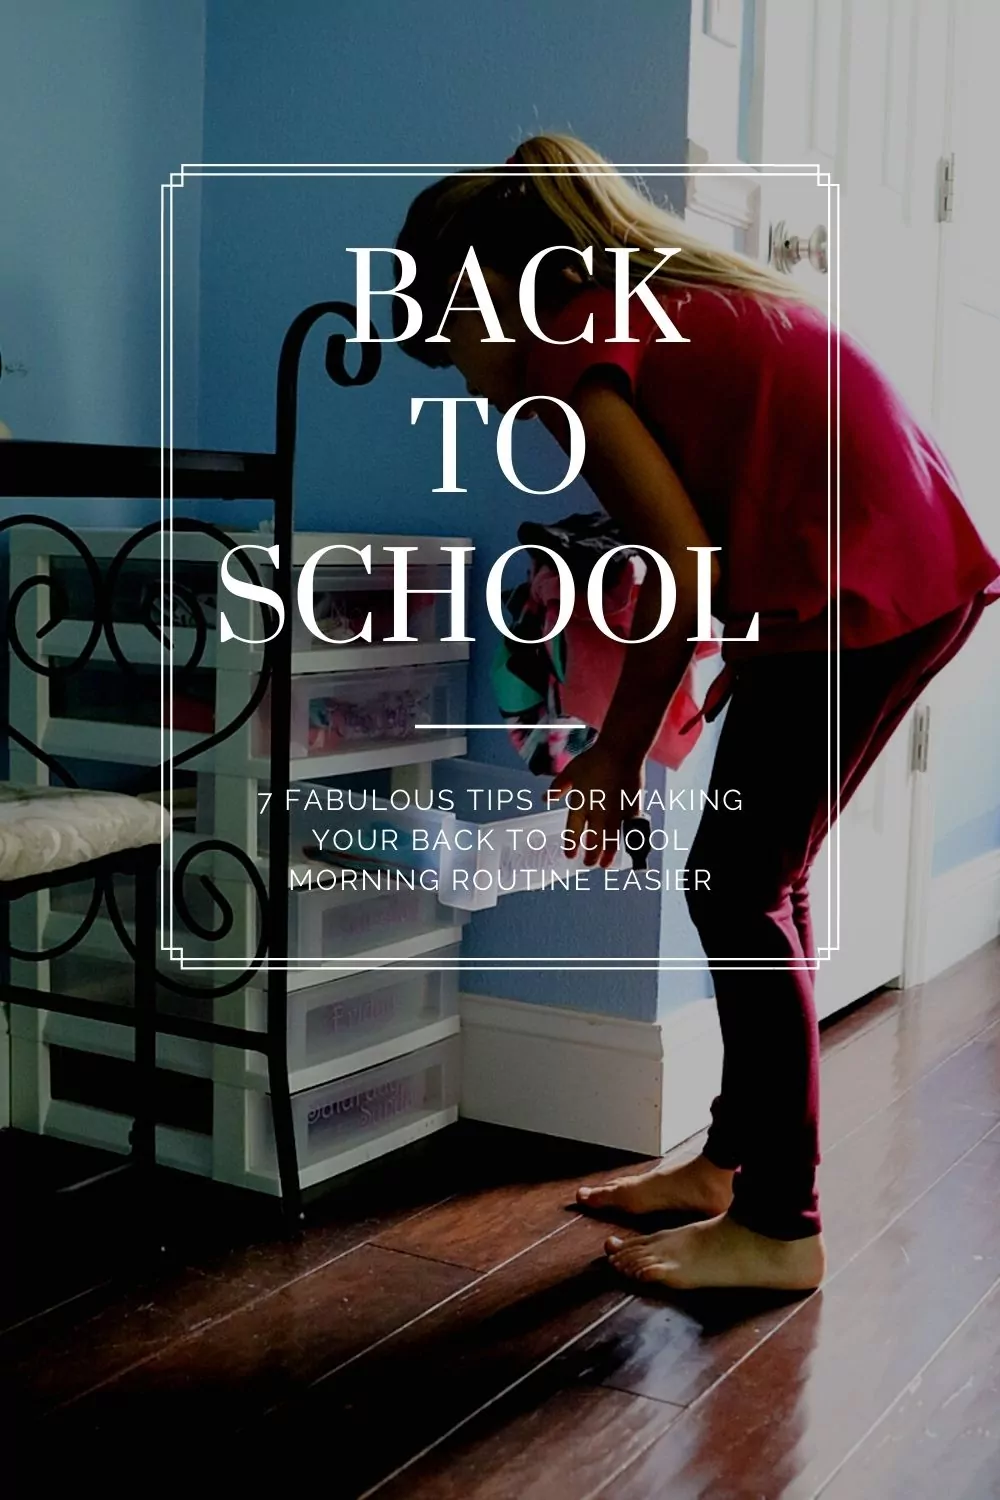 7 Tips for Making Your Back to School Morning Routine Easier